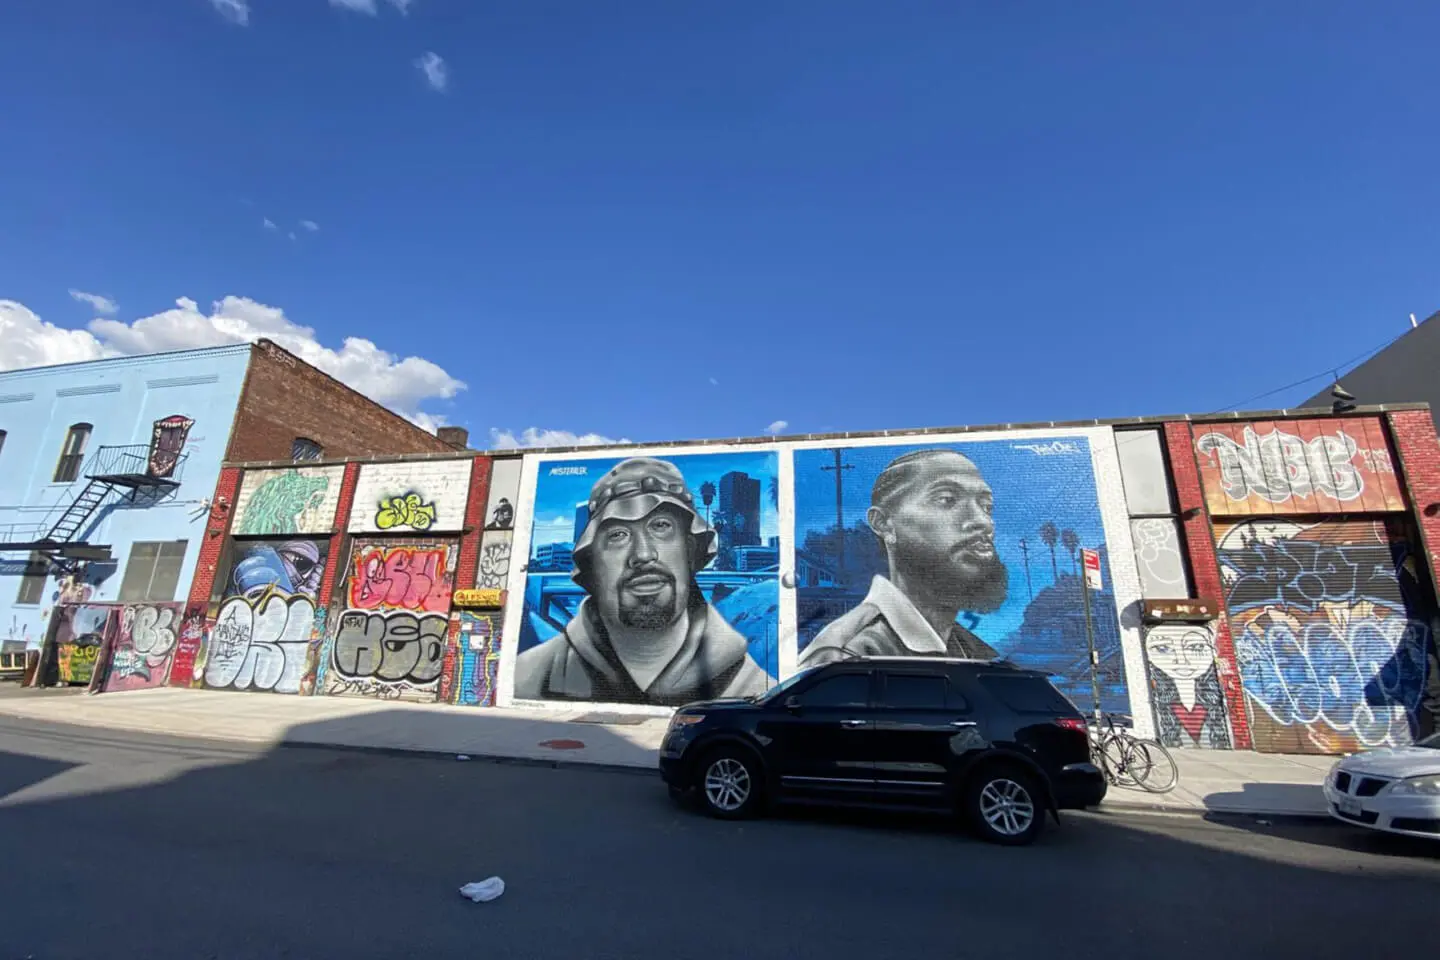 A colorful street mural of two men's faces on an urban building wall in Manhattan with parked cars in front.